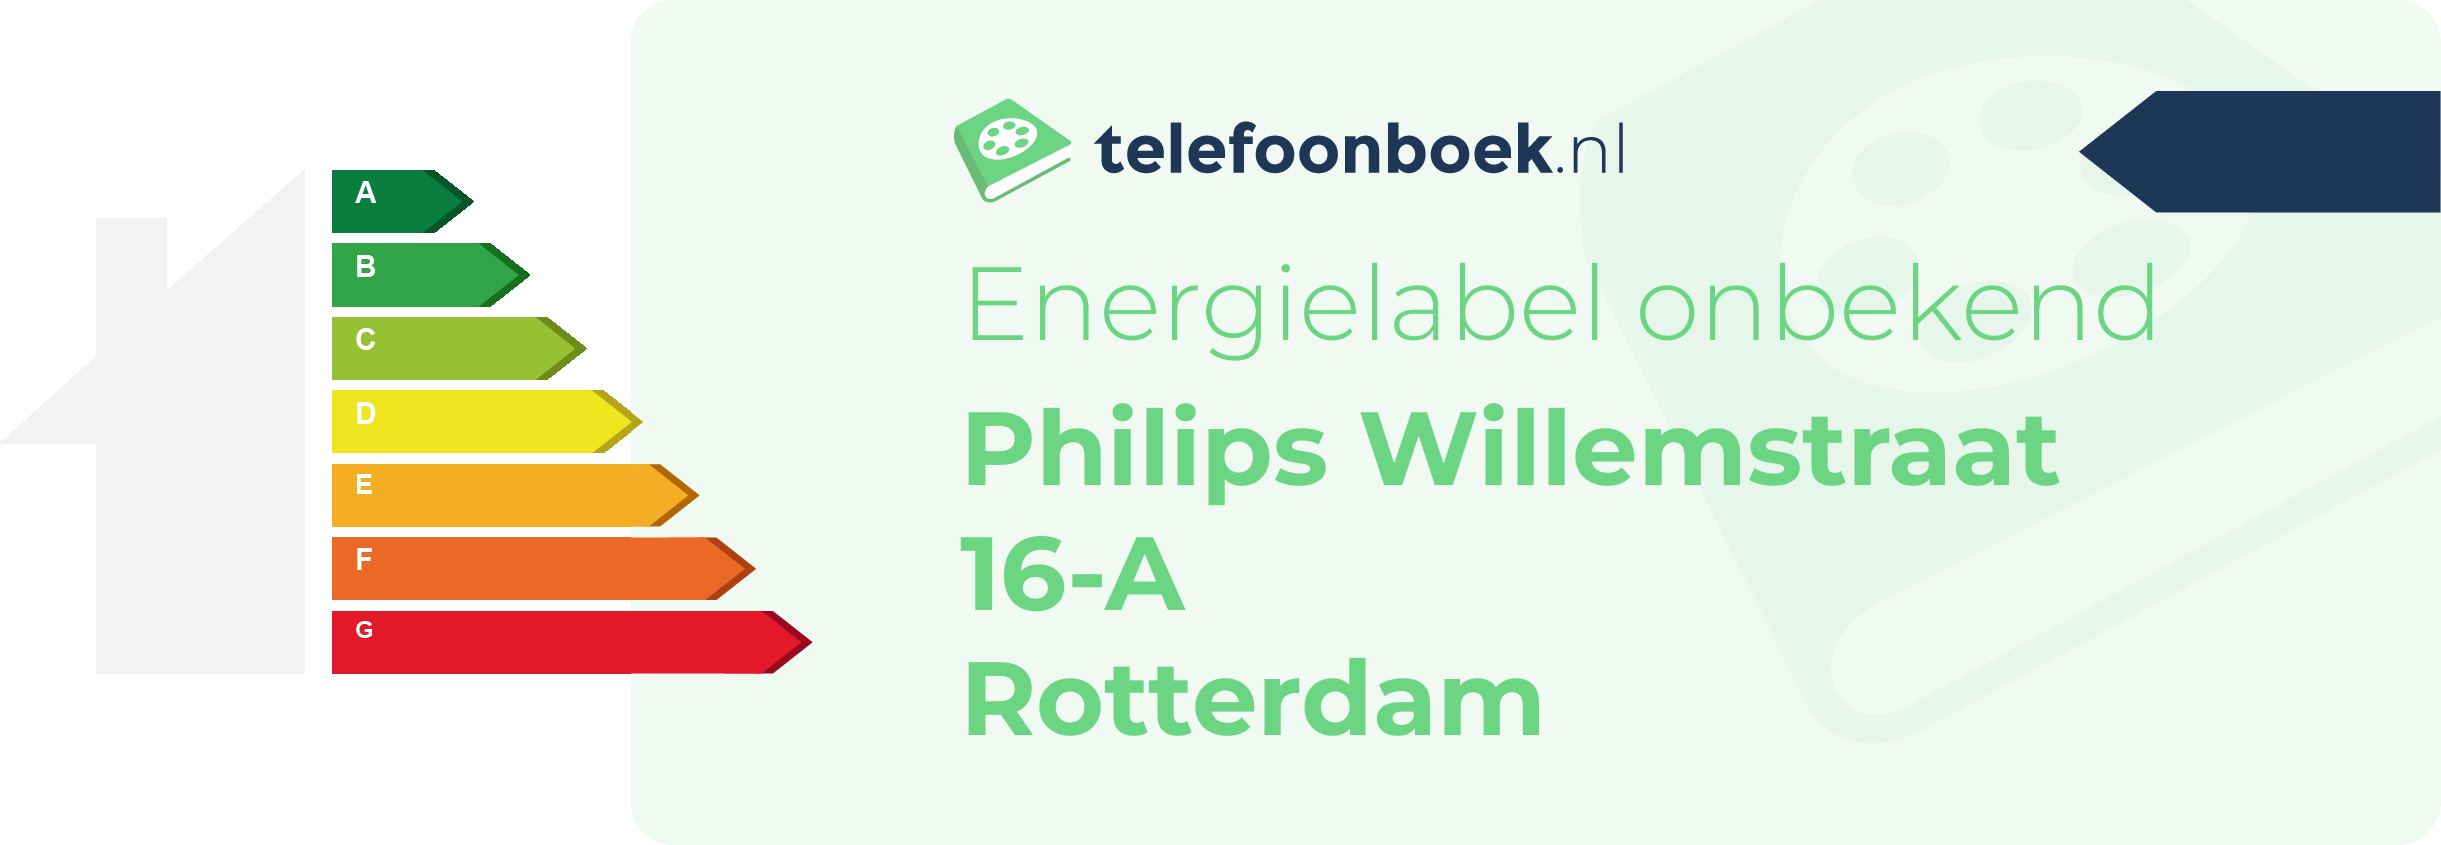 Energielabel Philips Willemstraat 16-A Rotterdam